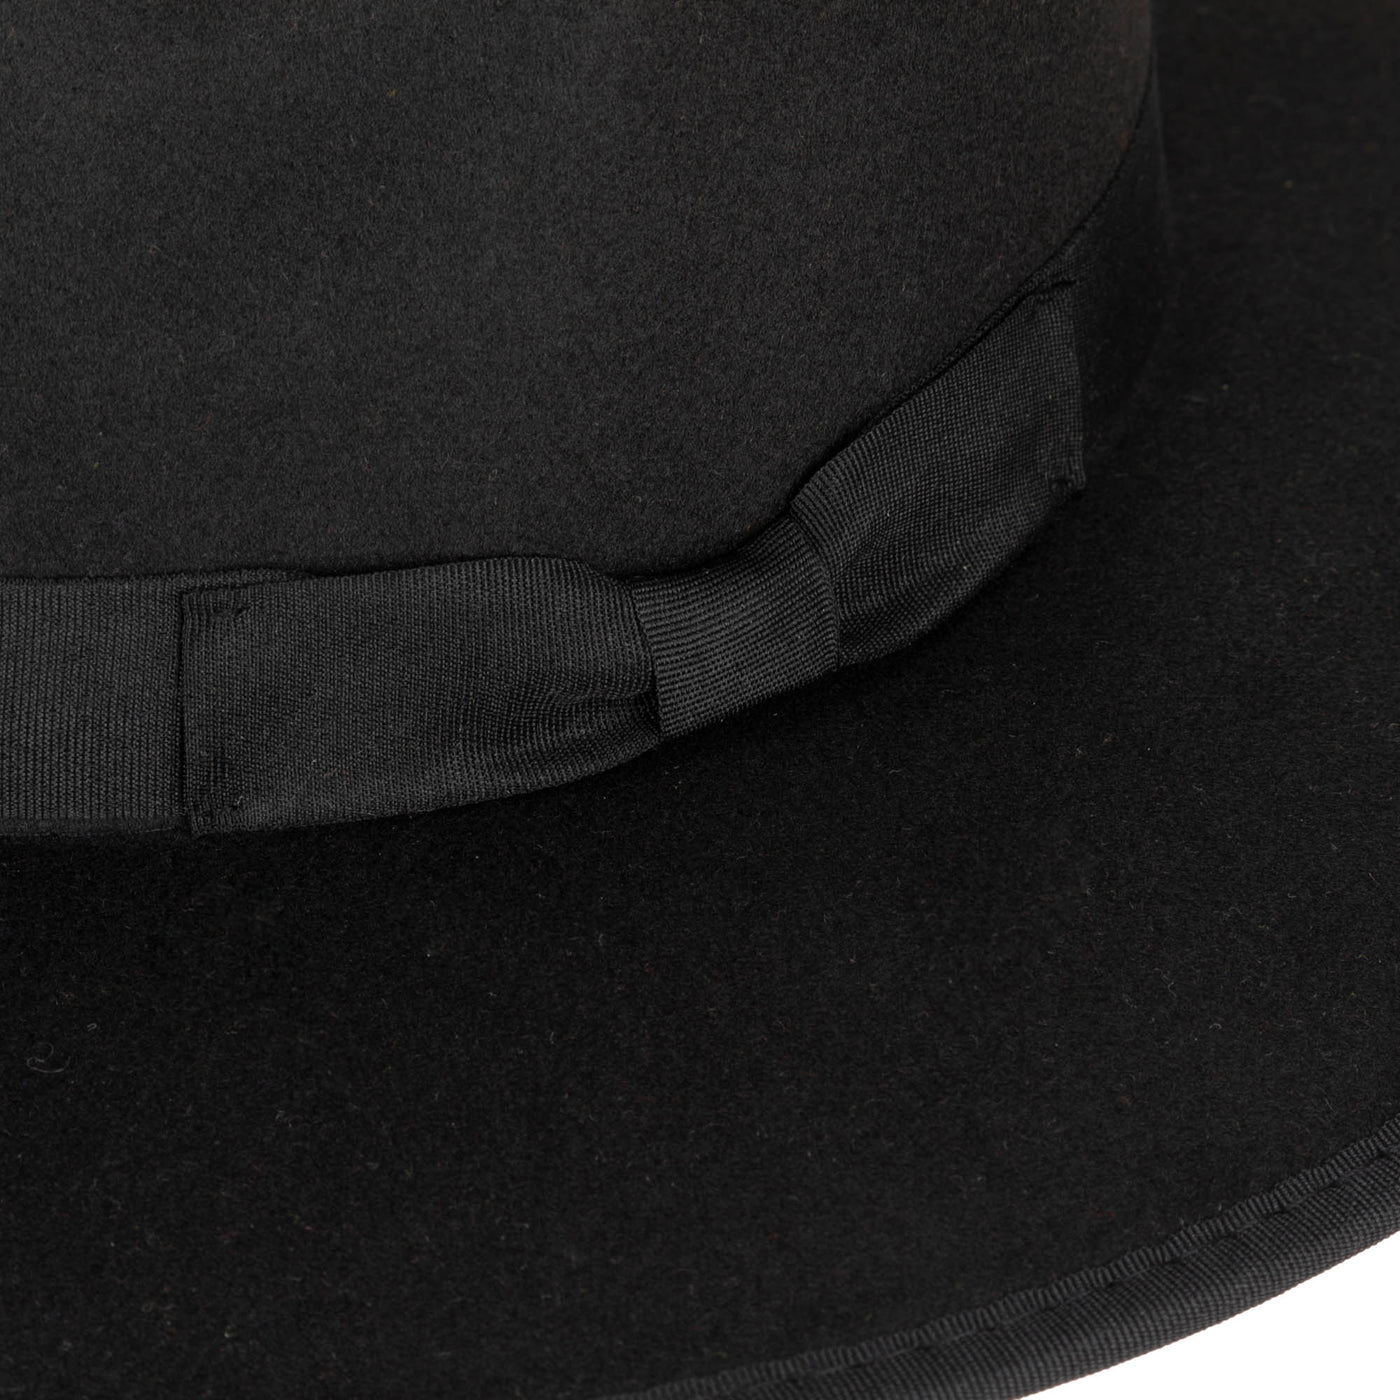 FEDORA - Classic Brim Fedora With Flat Grosgrain Bow And Band